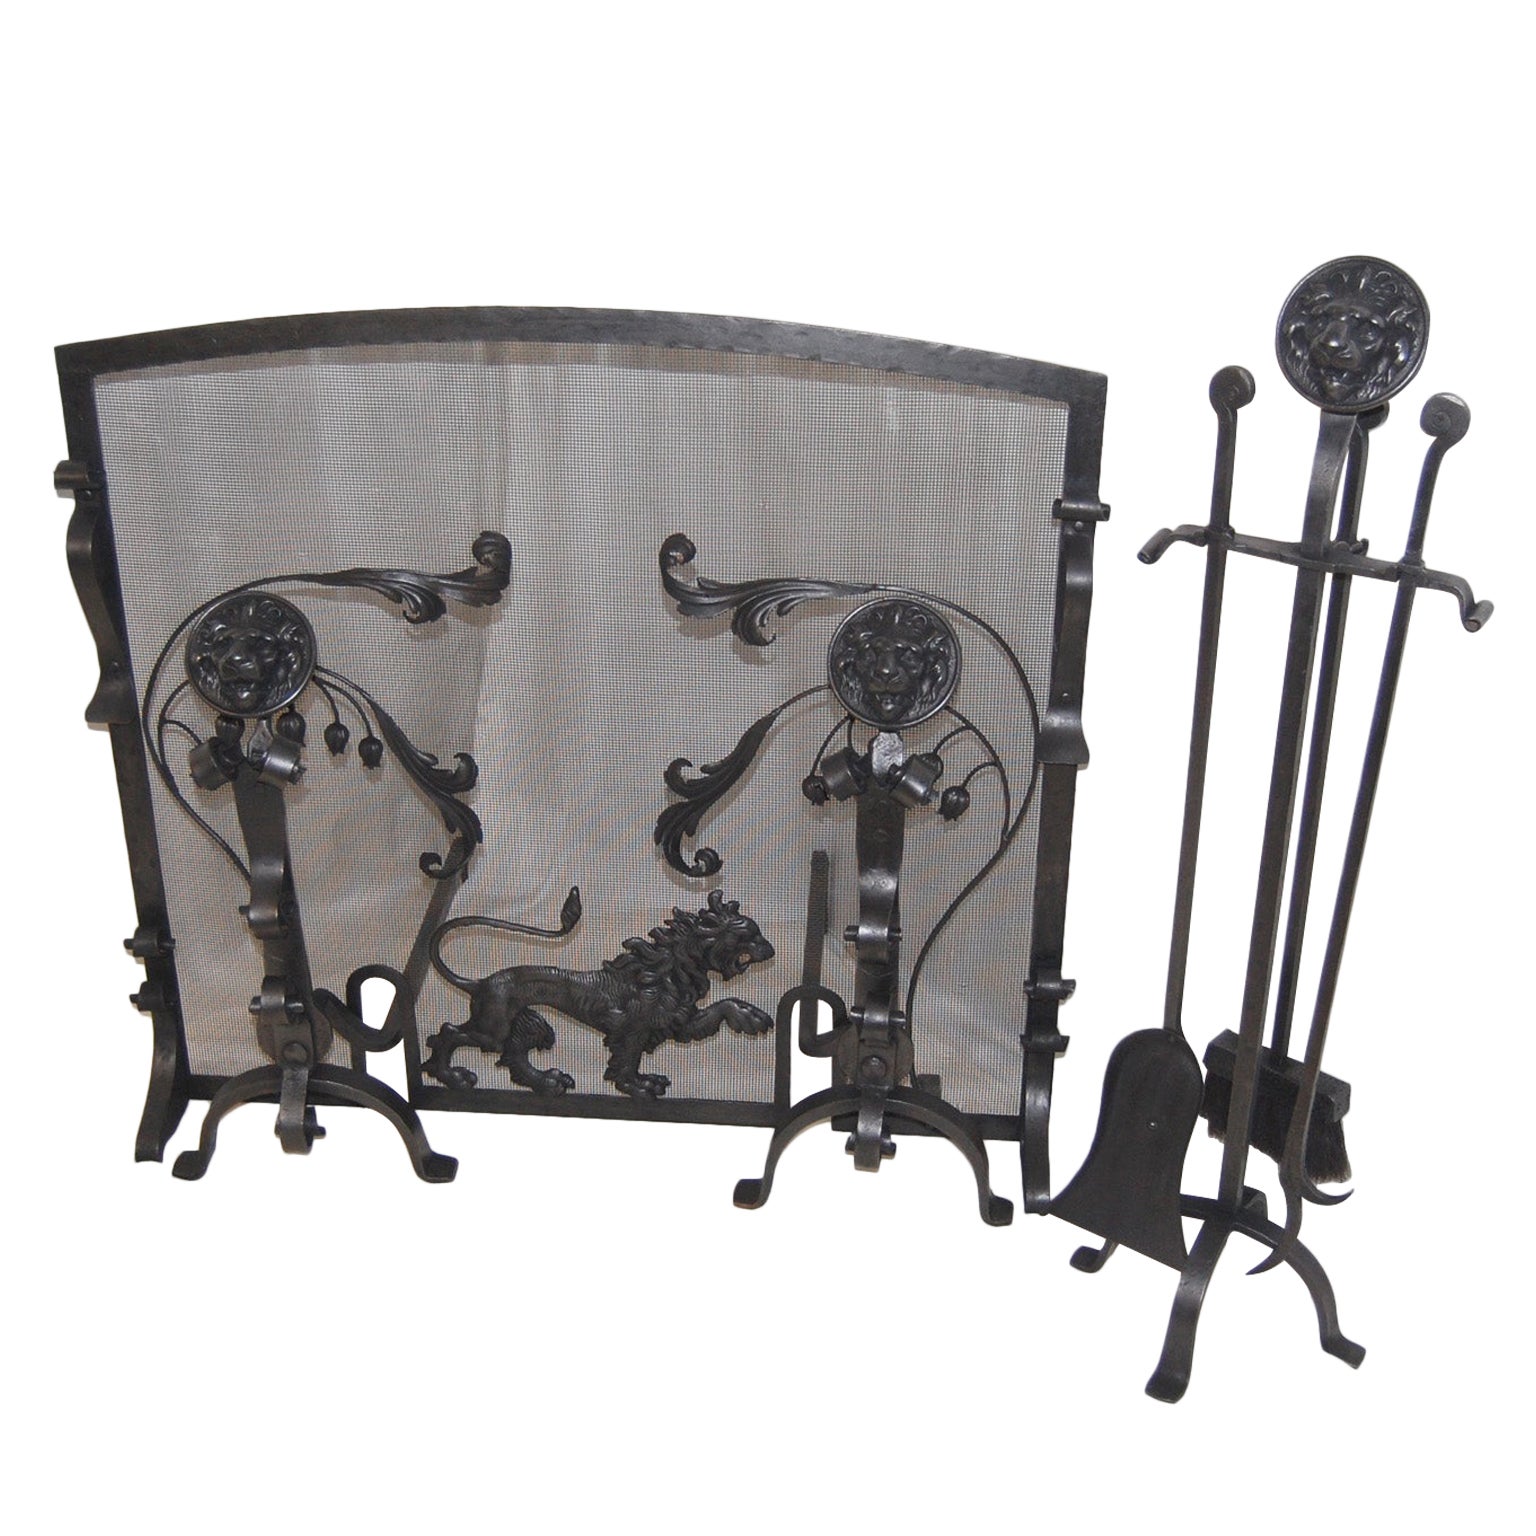 English Arts and Crafts Fireplace Set Lion Motif with Screen, Andirons and Tools